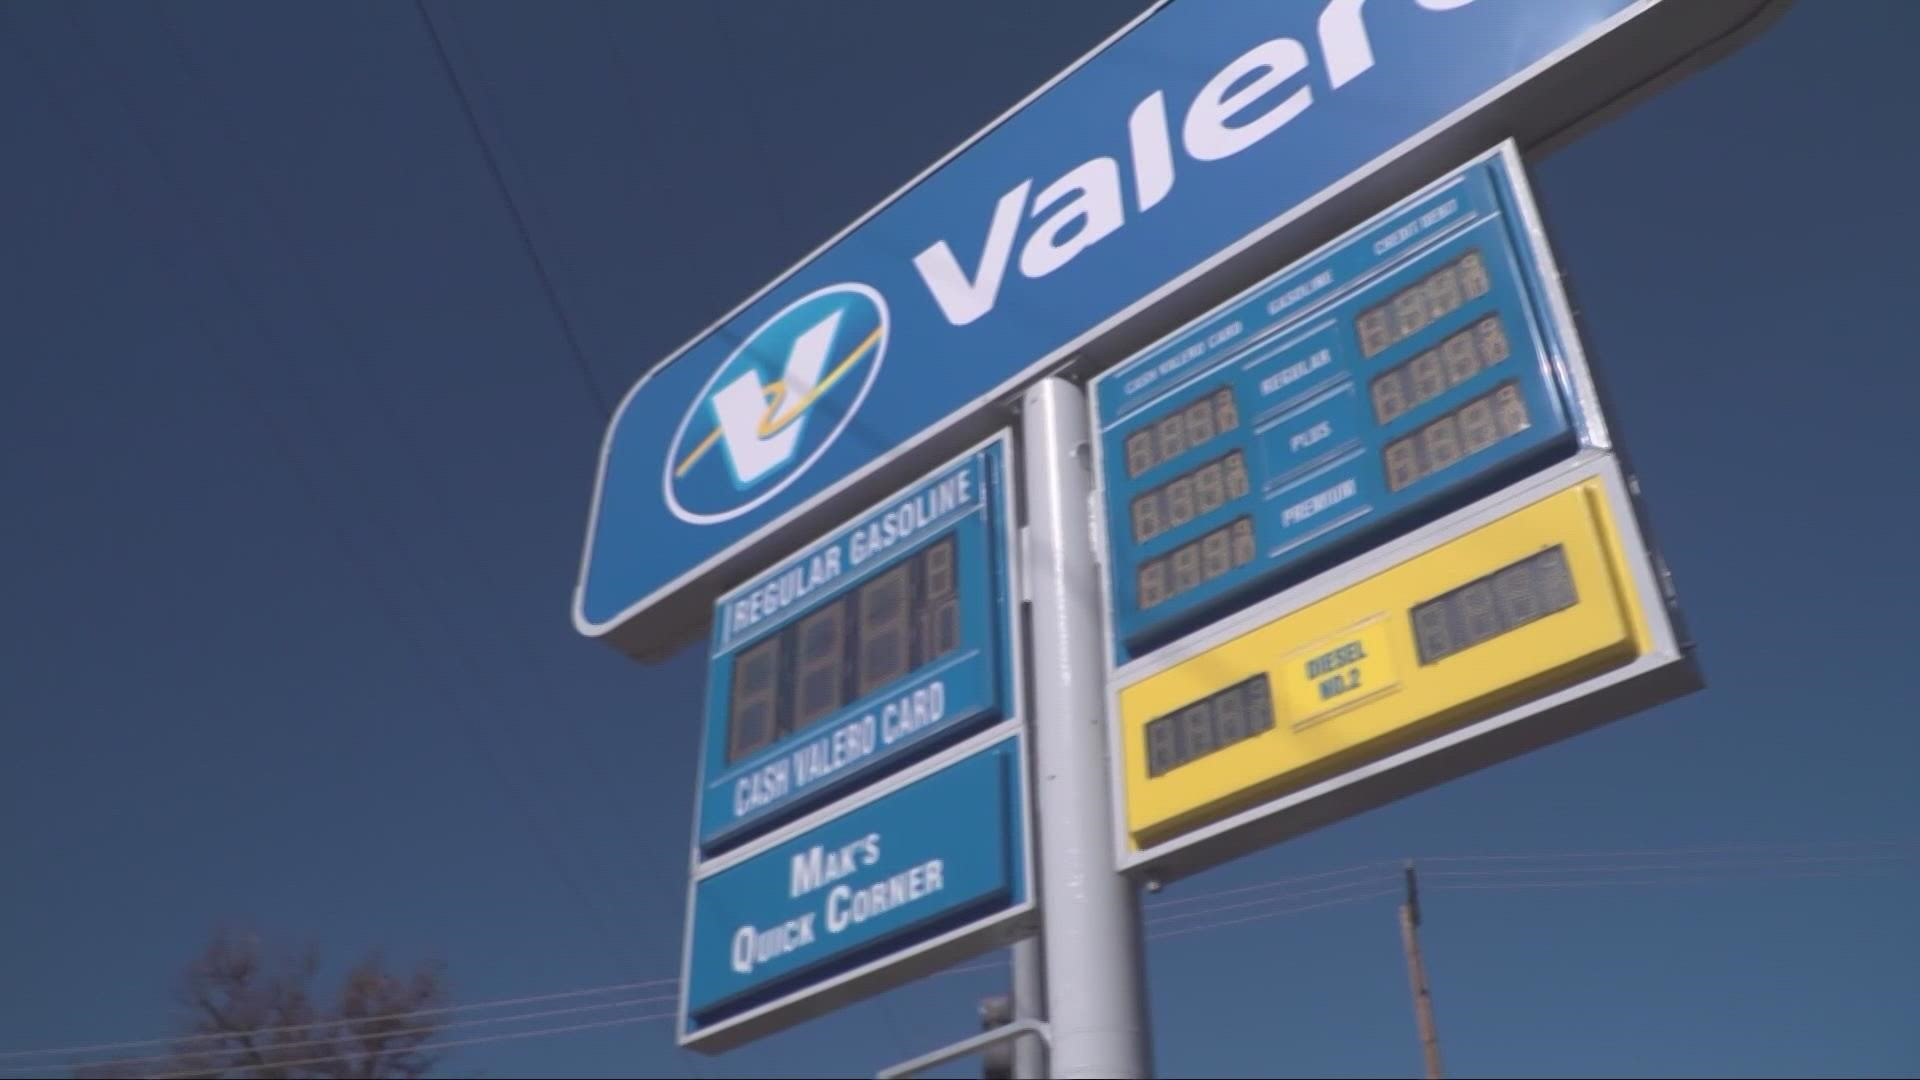 The price difference between California and the rest of the country in October was $2.60 per gallon.